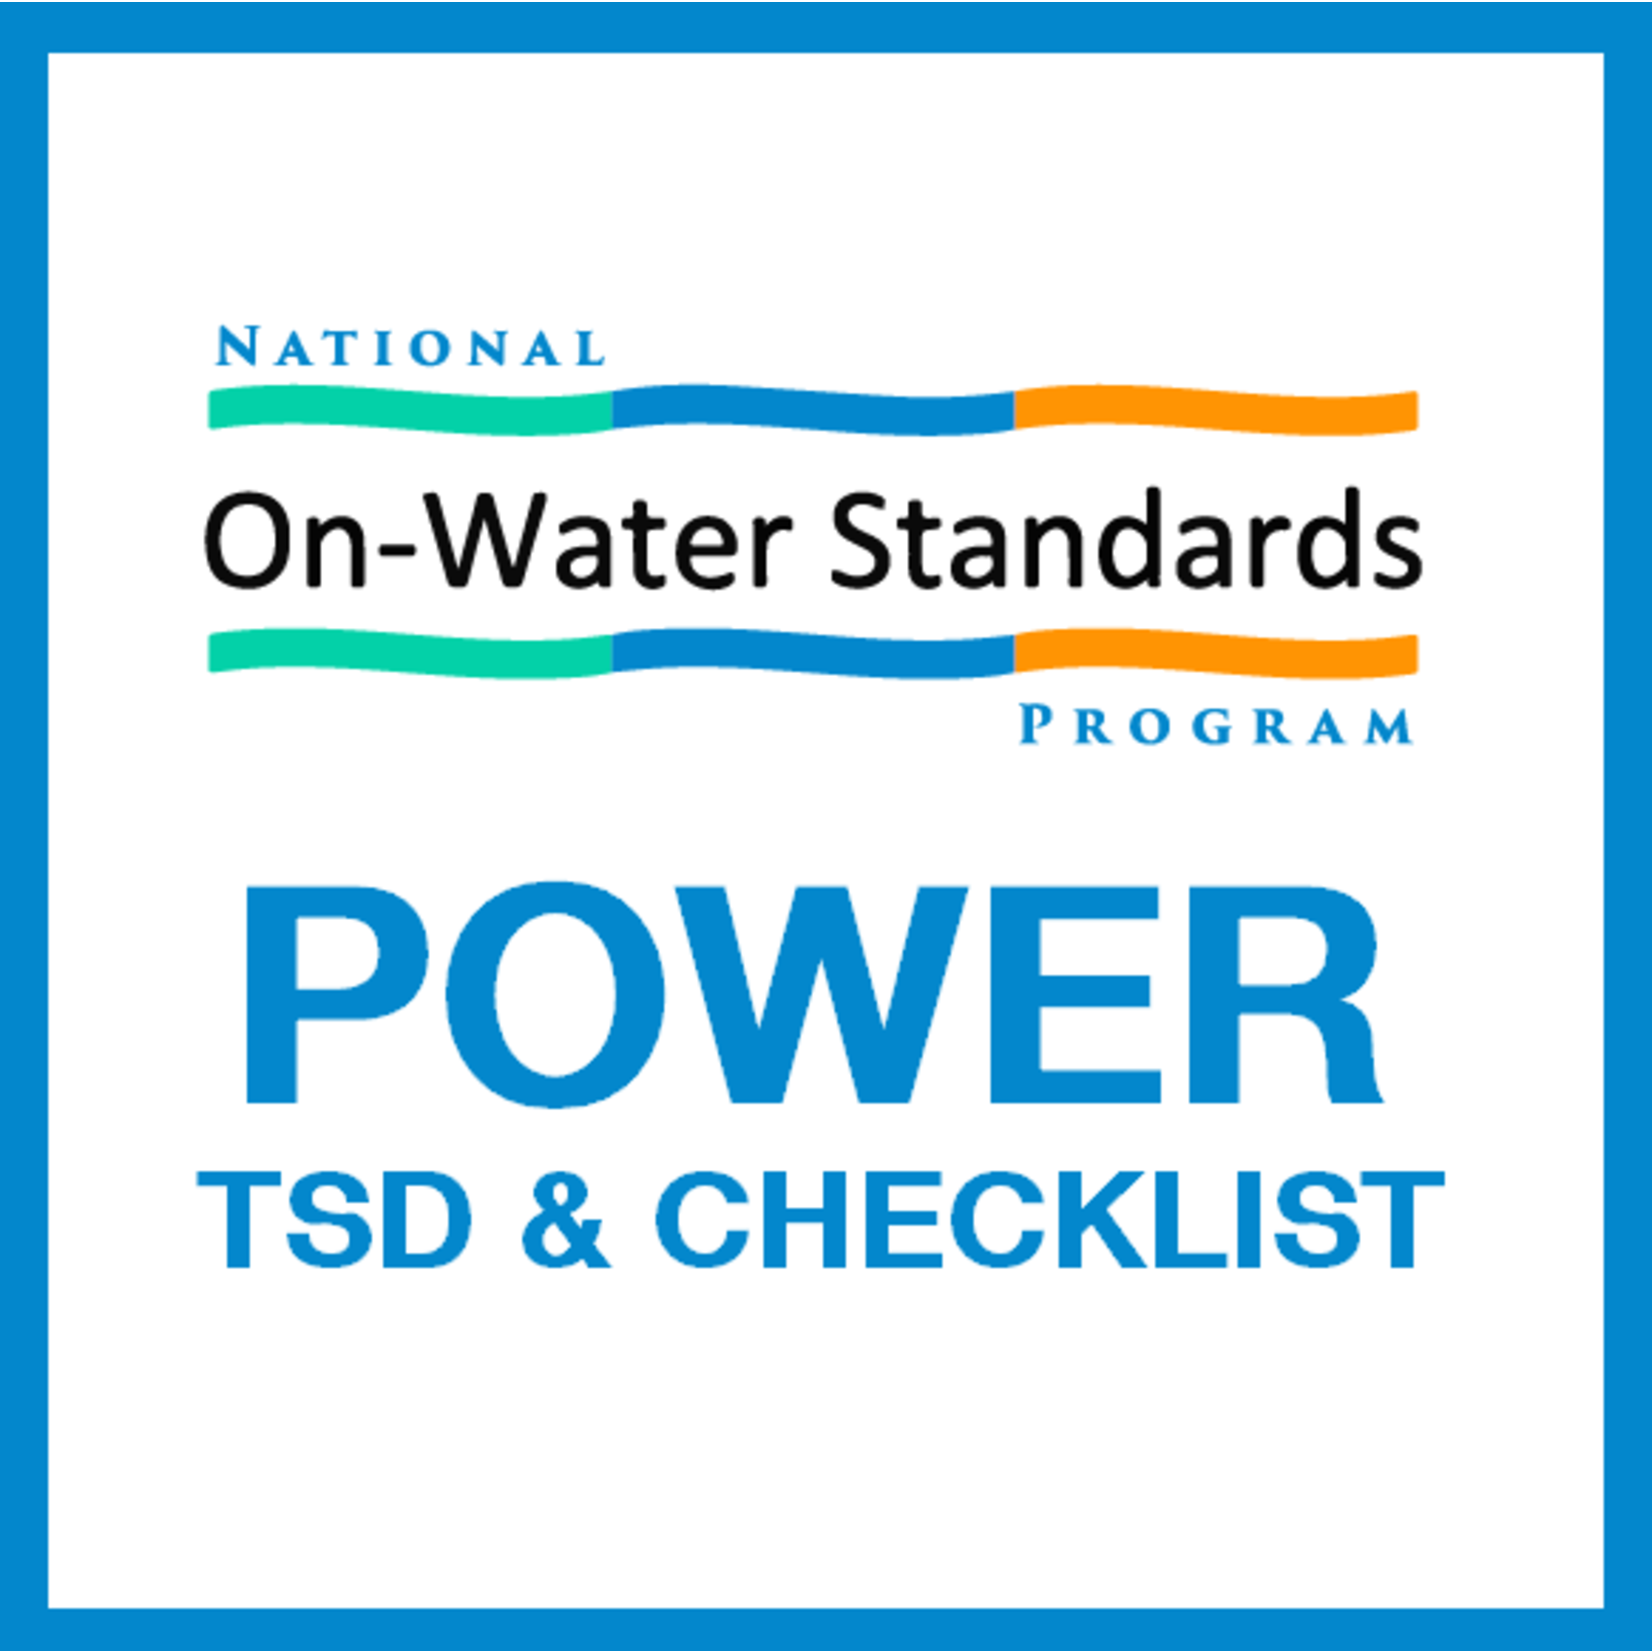 NOWS: EDU-1 Powerboating Technical Support Document & Checklist